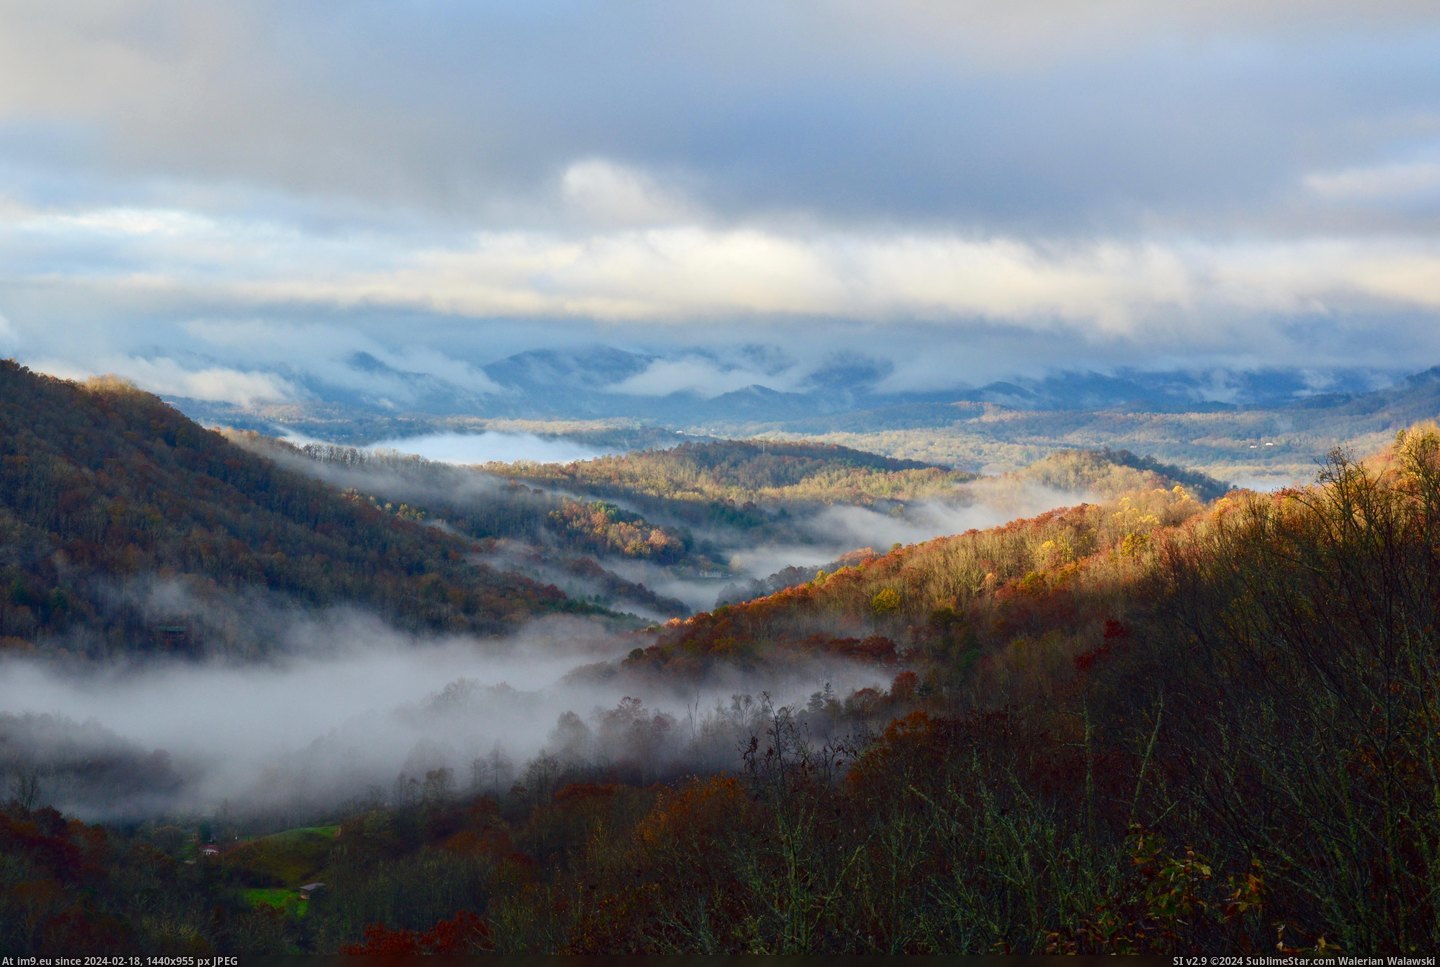 #Photo #Great #North #Carolina #November #Smoky #Mountains #Usa #Rain [Earthporn] Great Smoky Mountains, North Carolina USA. This photo was taken from my home in November of 2015. A rain had just pa Pic. (Image of album My r/EARTHPORN favs))